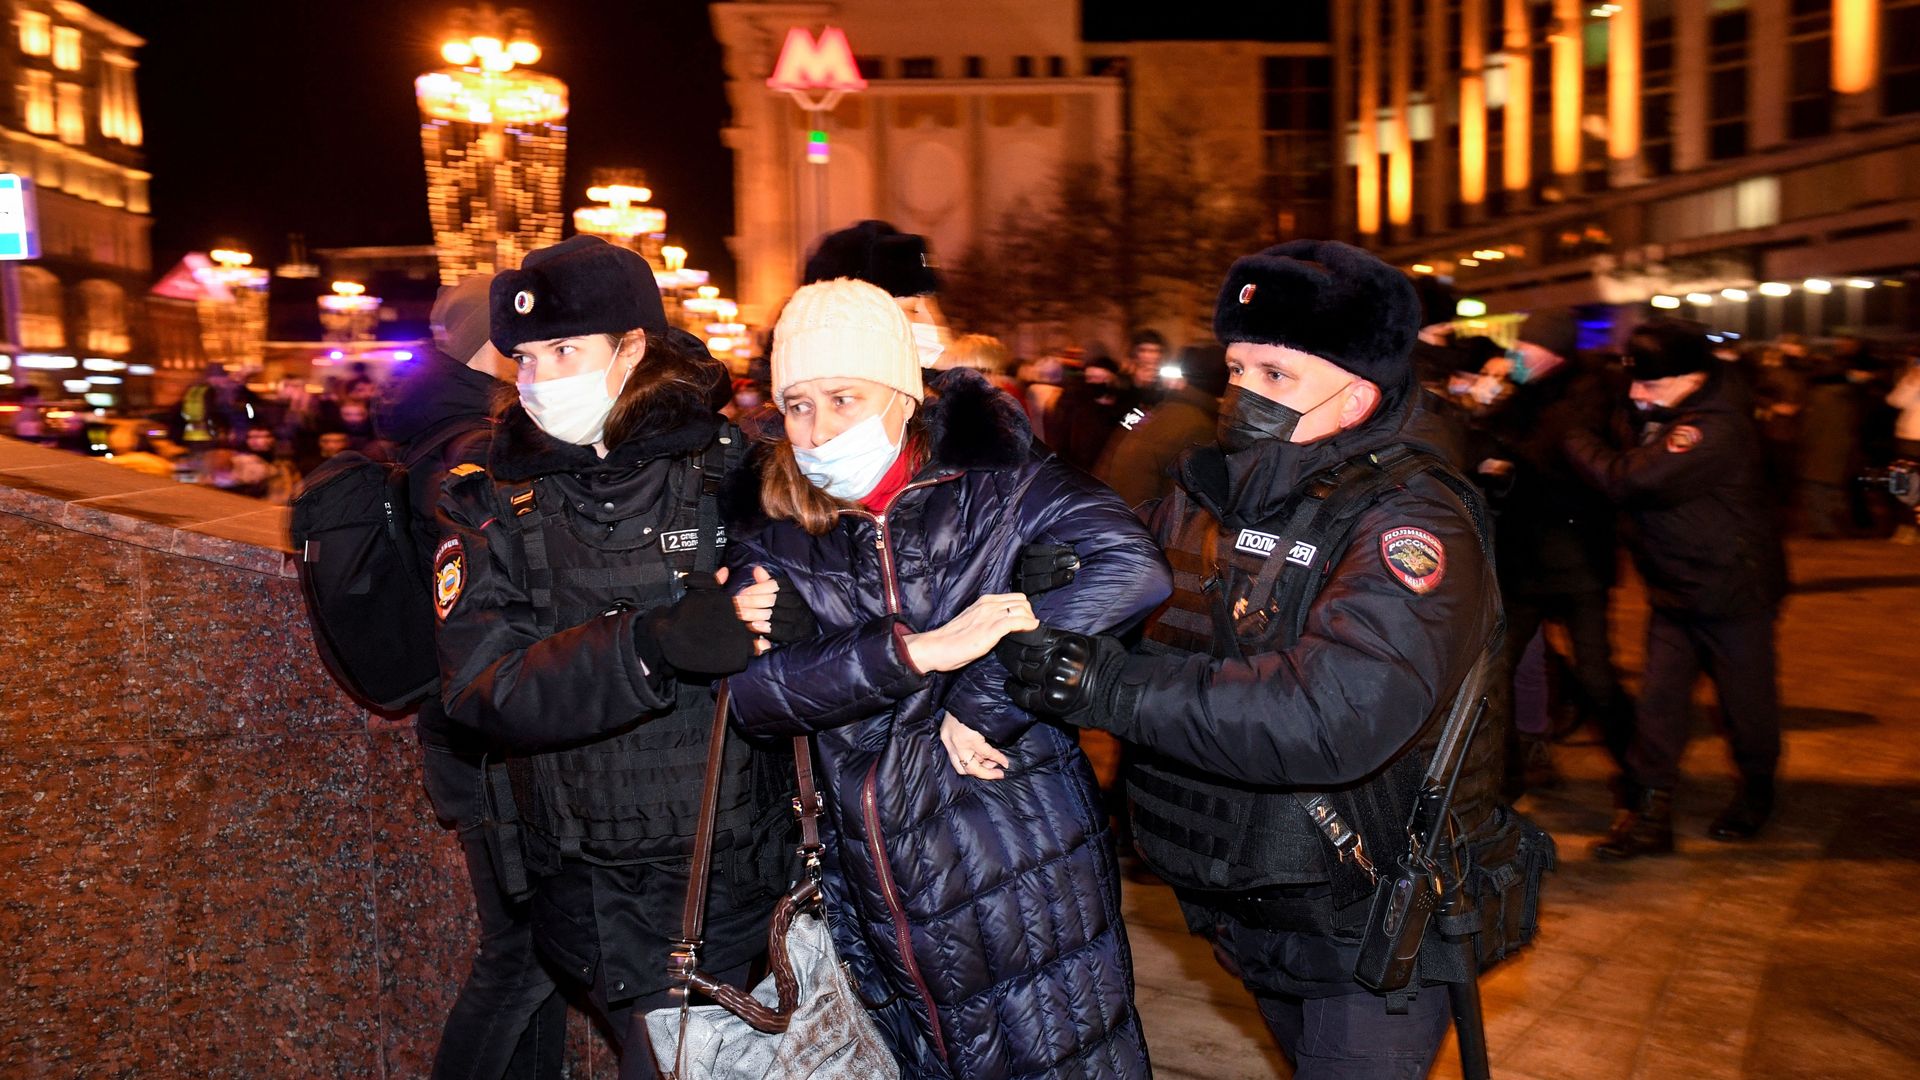 Police officers detain a demonstrator during a protest against Russia's invasion of Ukraine in Moscow on February 24